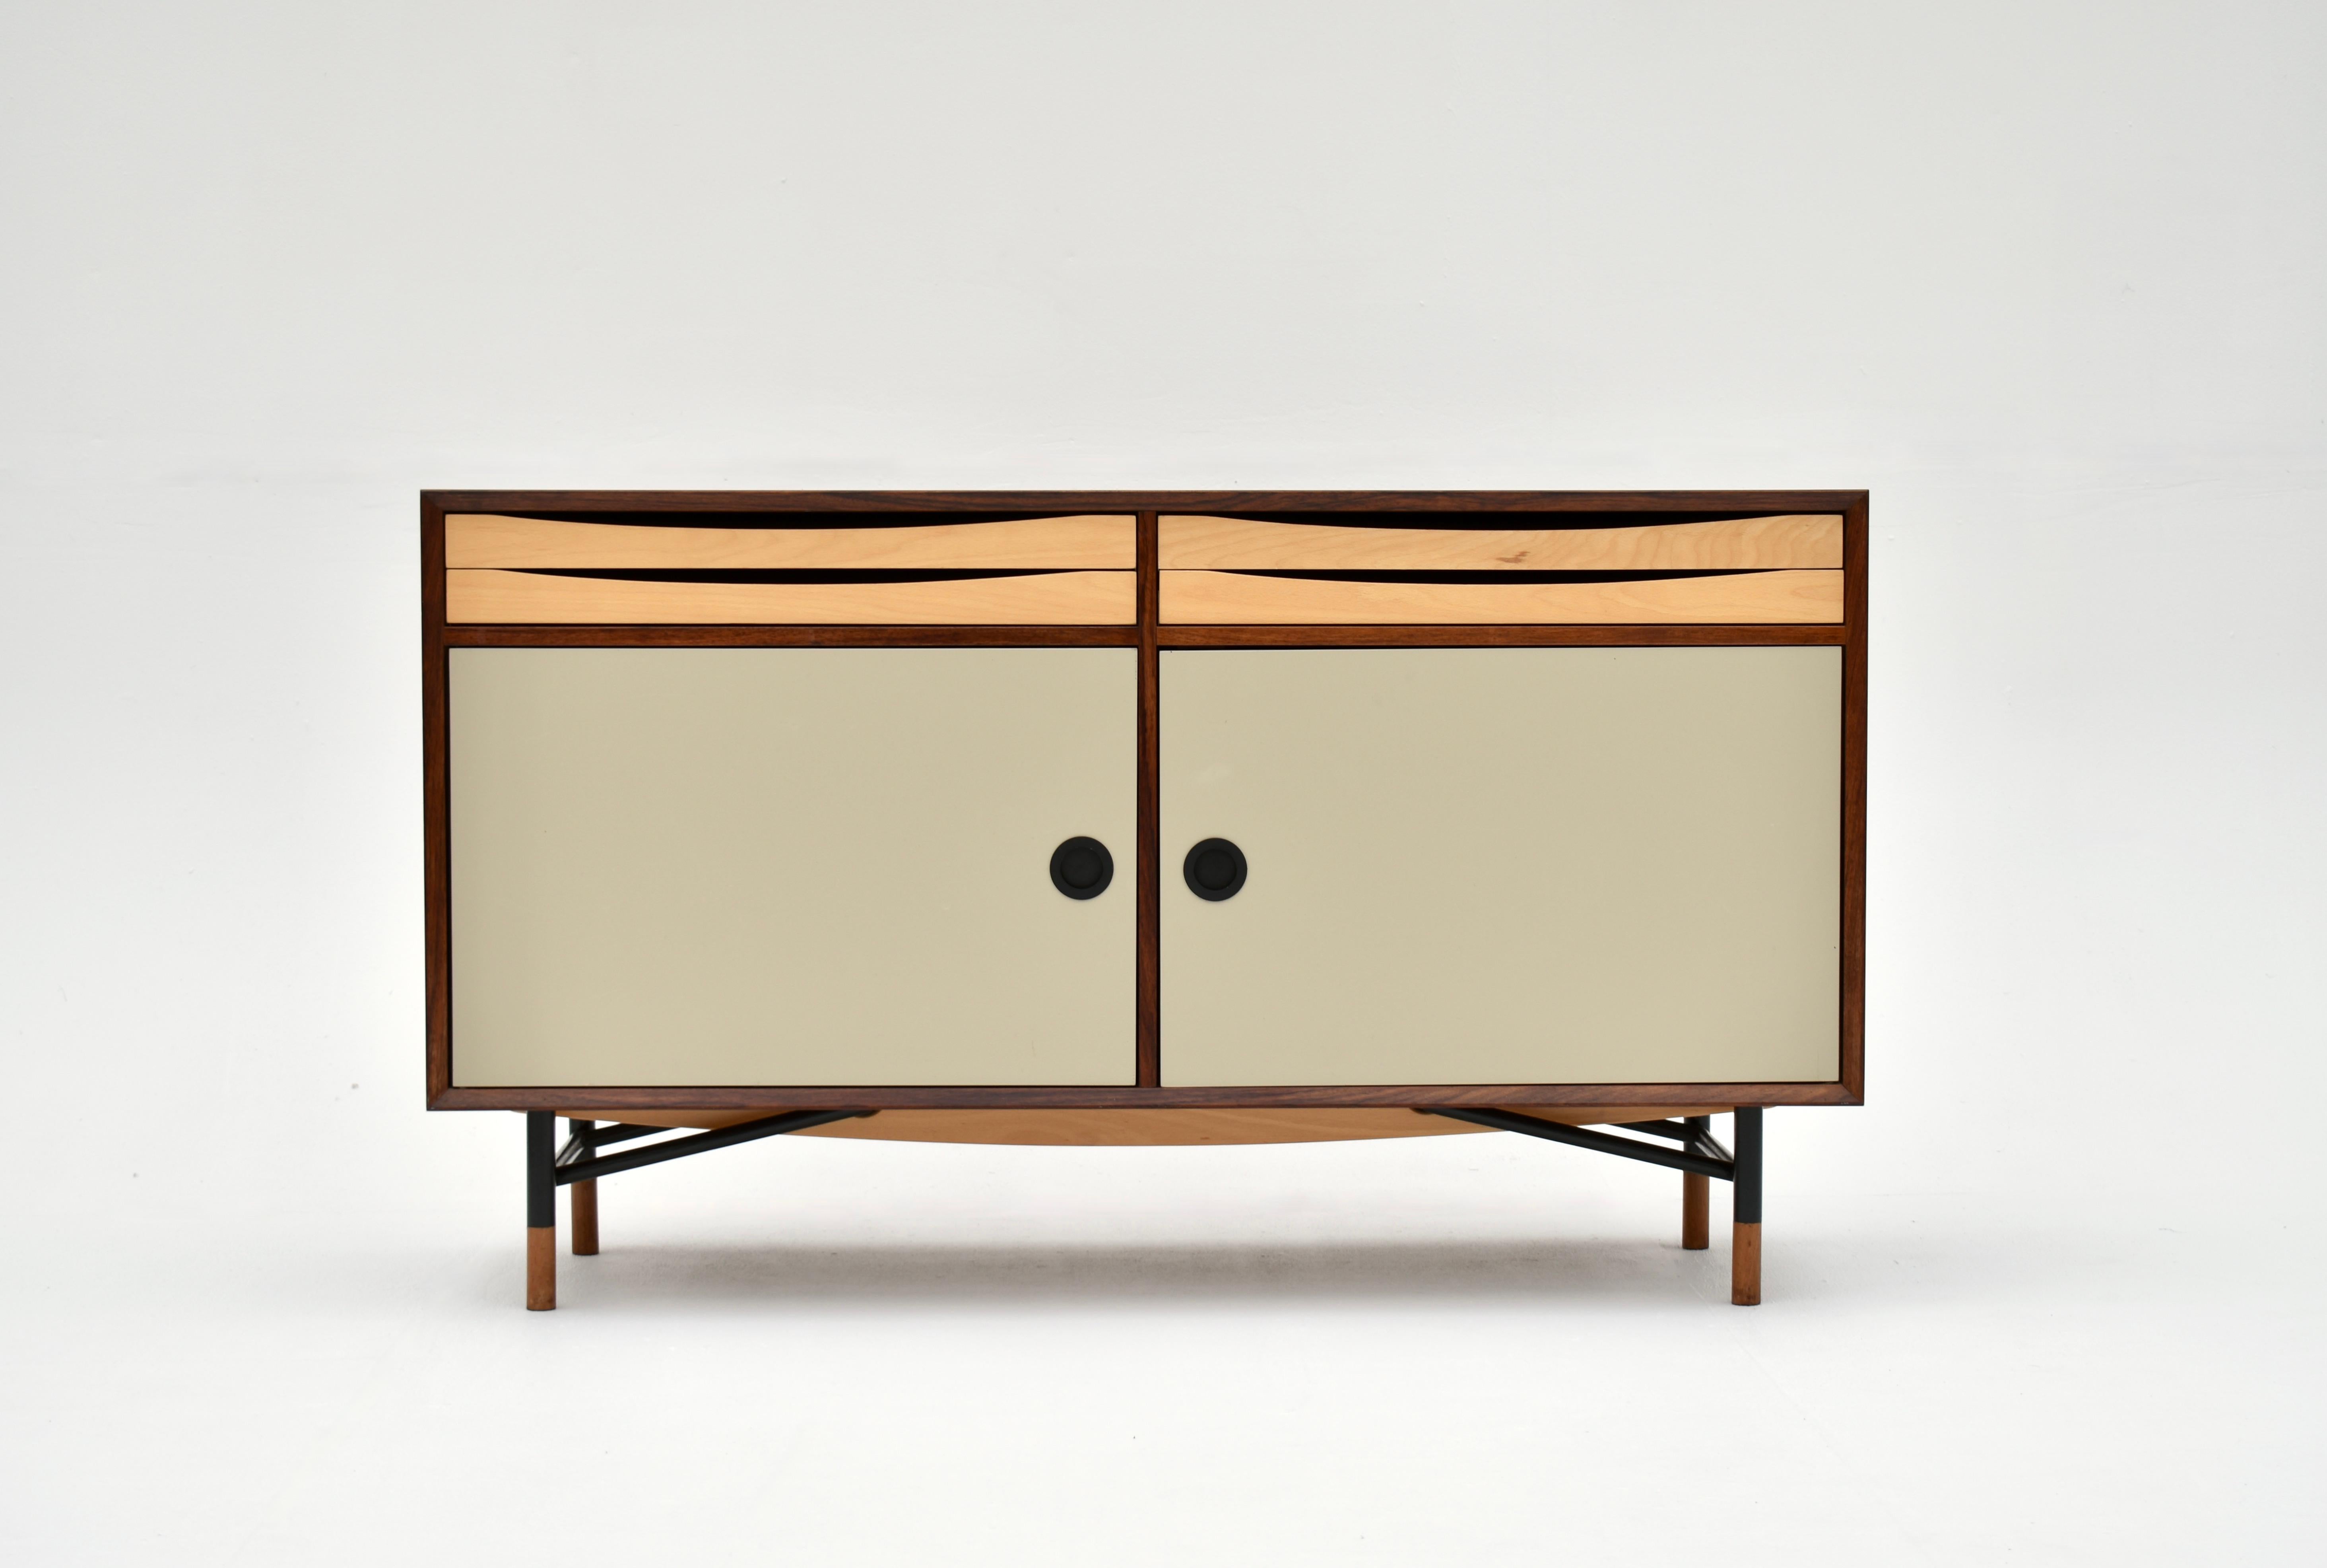 A very handsome high quality sideboard very much in the style of Finn Juhl.

Drawing very heavily upon the designs of Juhl and Vodder the sideboard features a Rosewood carcass with Taupe coloured enamel doors. Above the doors four slim drawers of